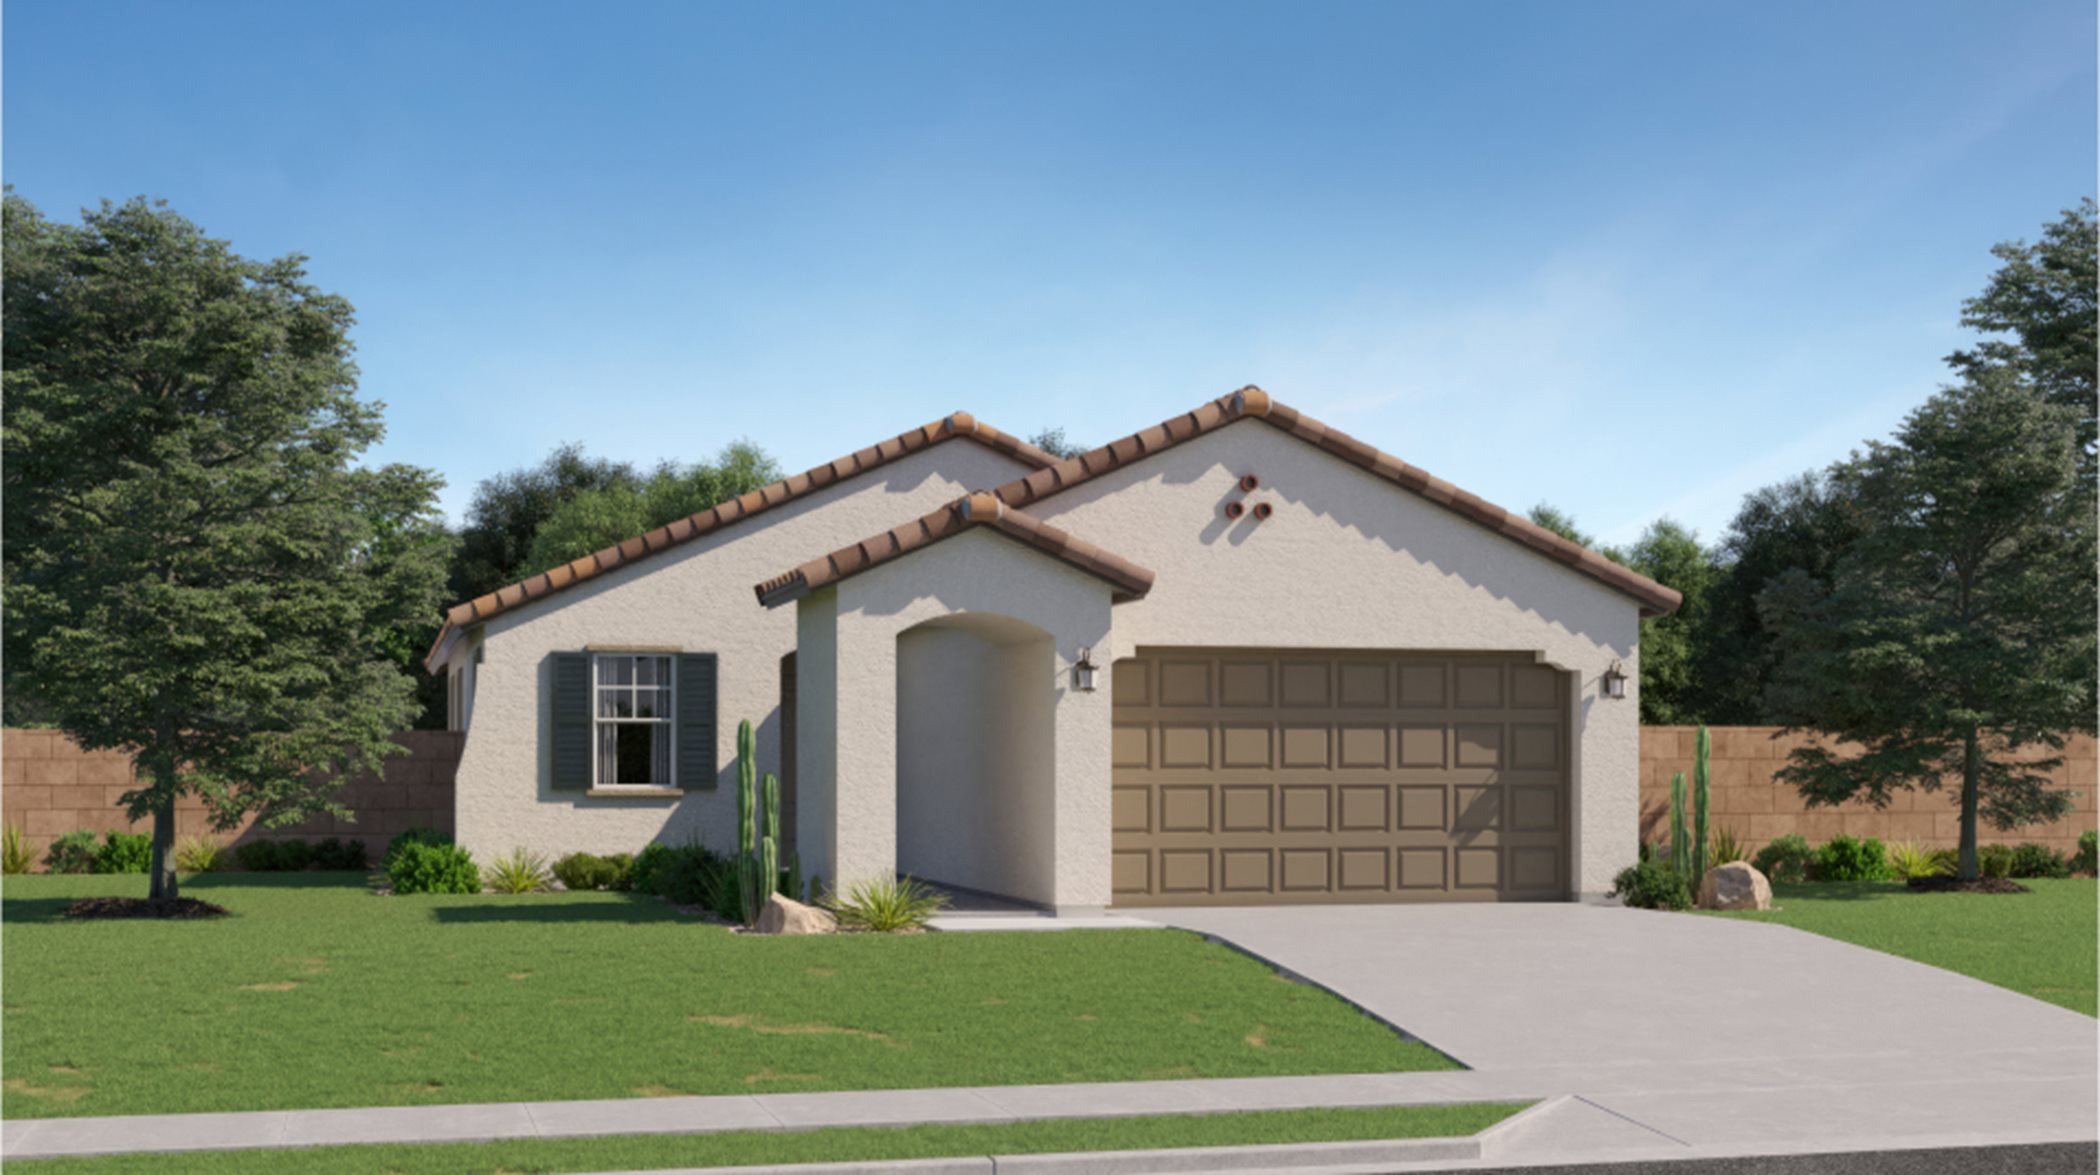 Spanish-style home exterior rendering